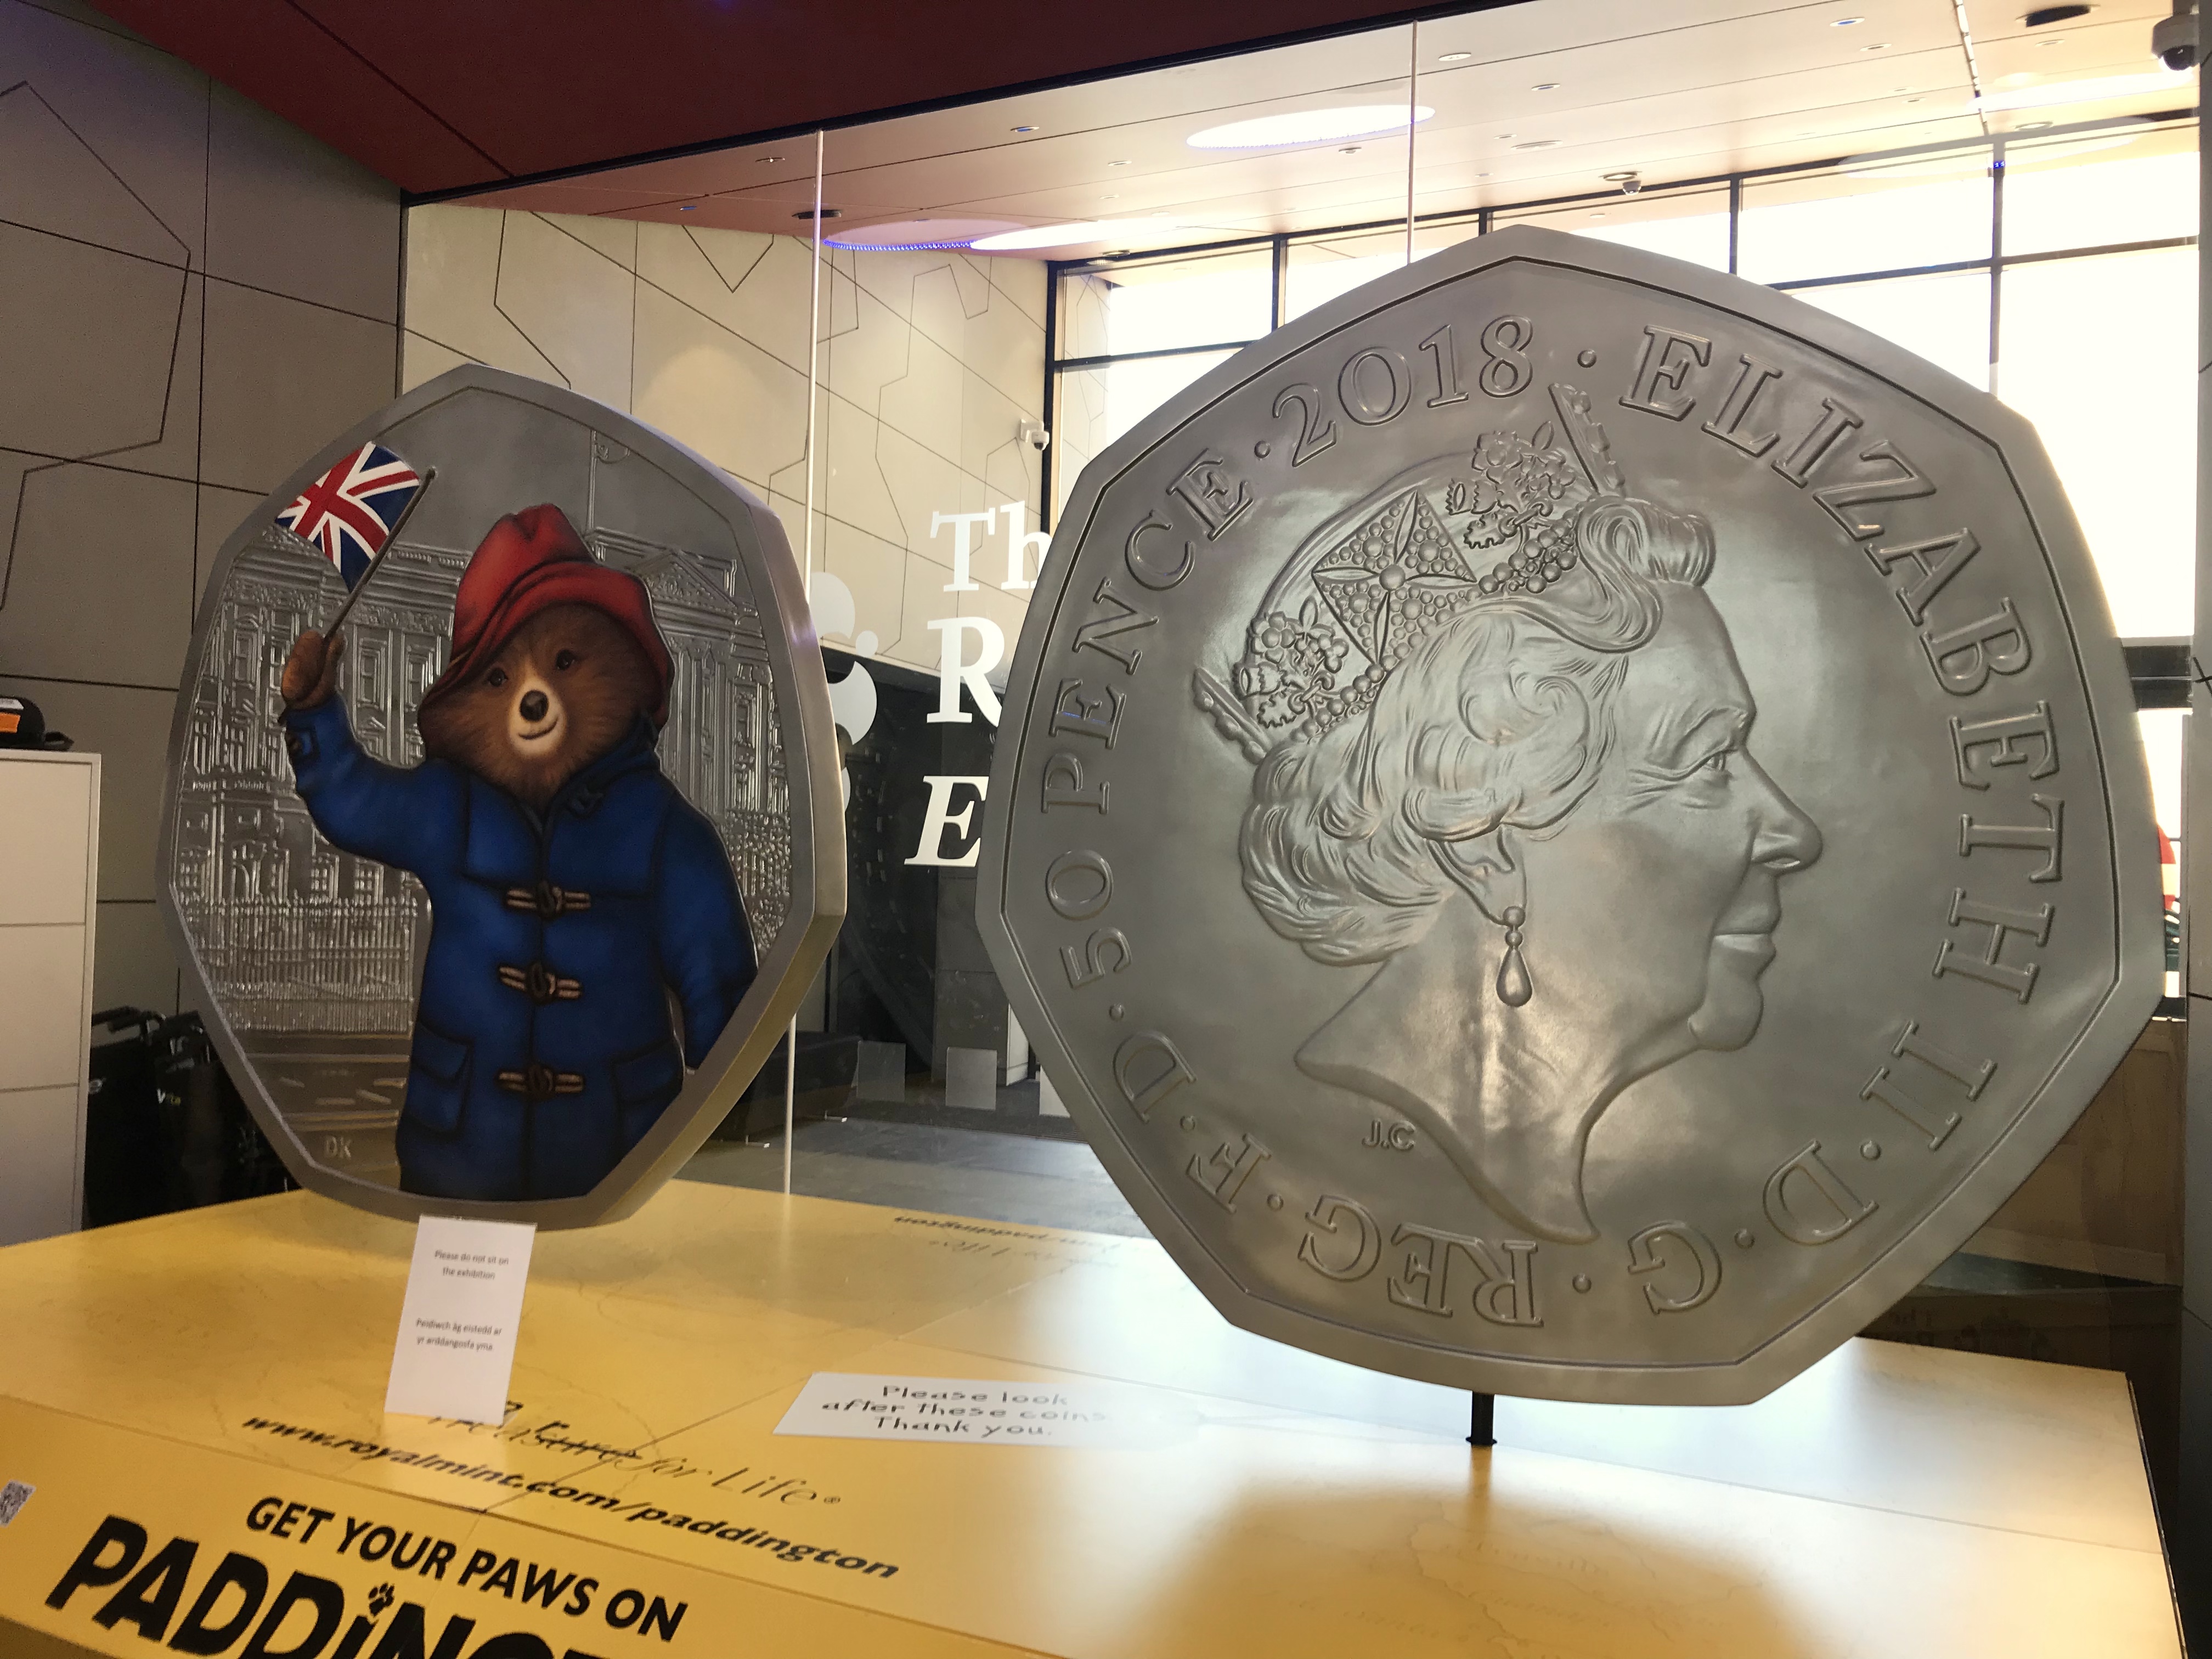 The Royal Mint Experience